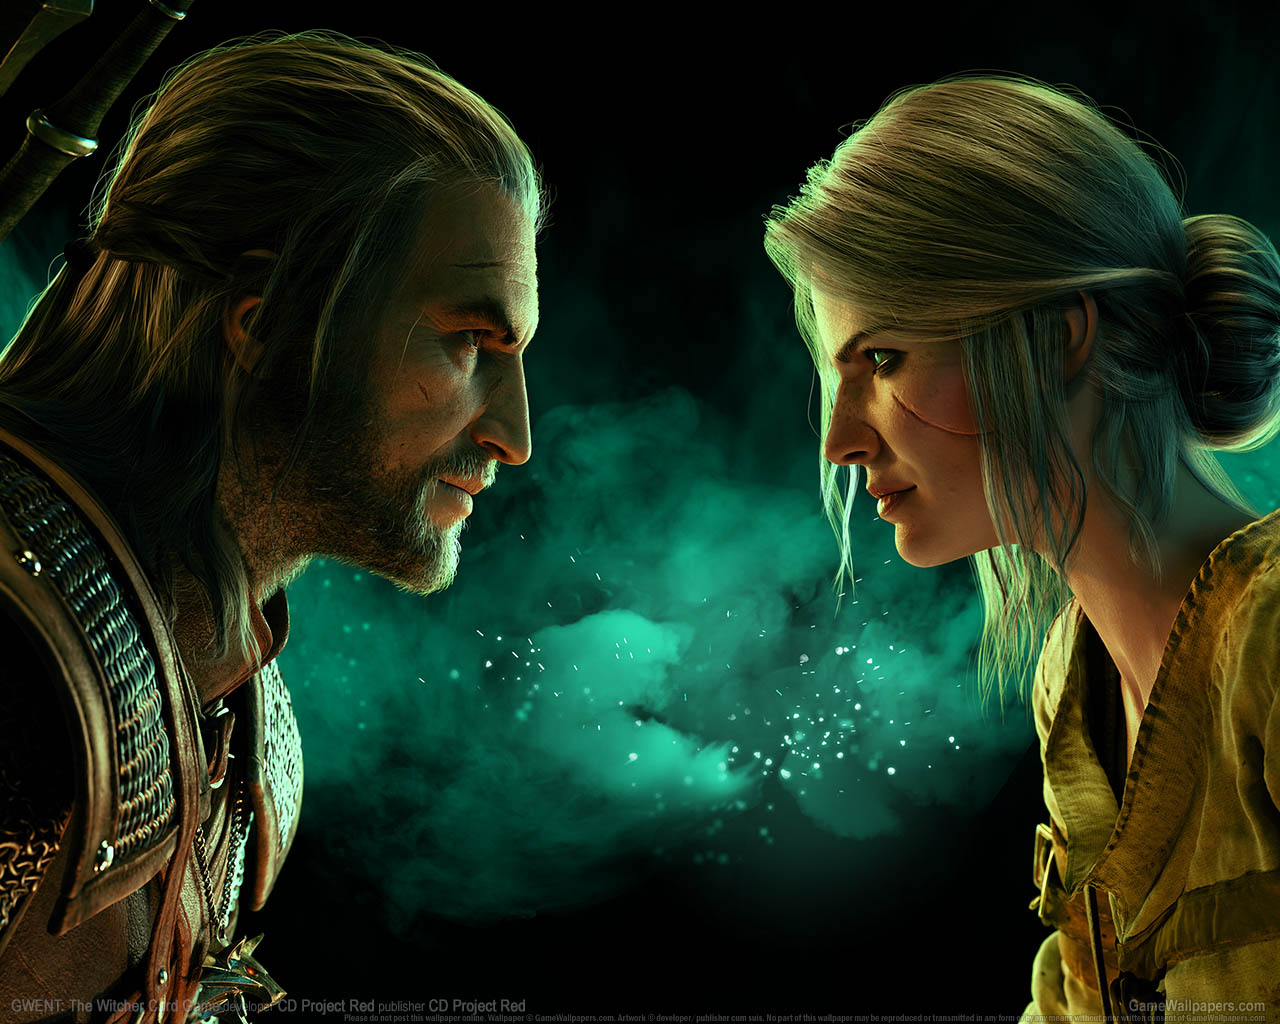 GWENT%253A The Witcher Card Game wallpaper 08 1280x1024